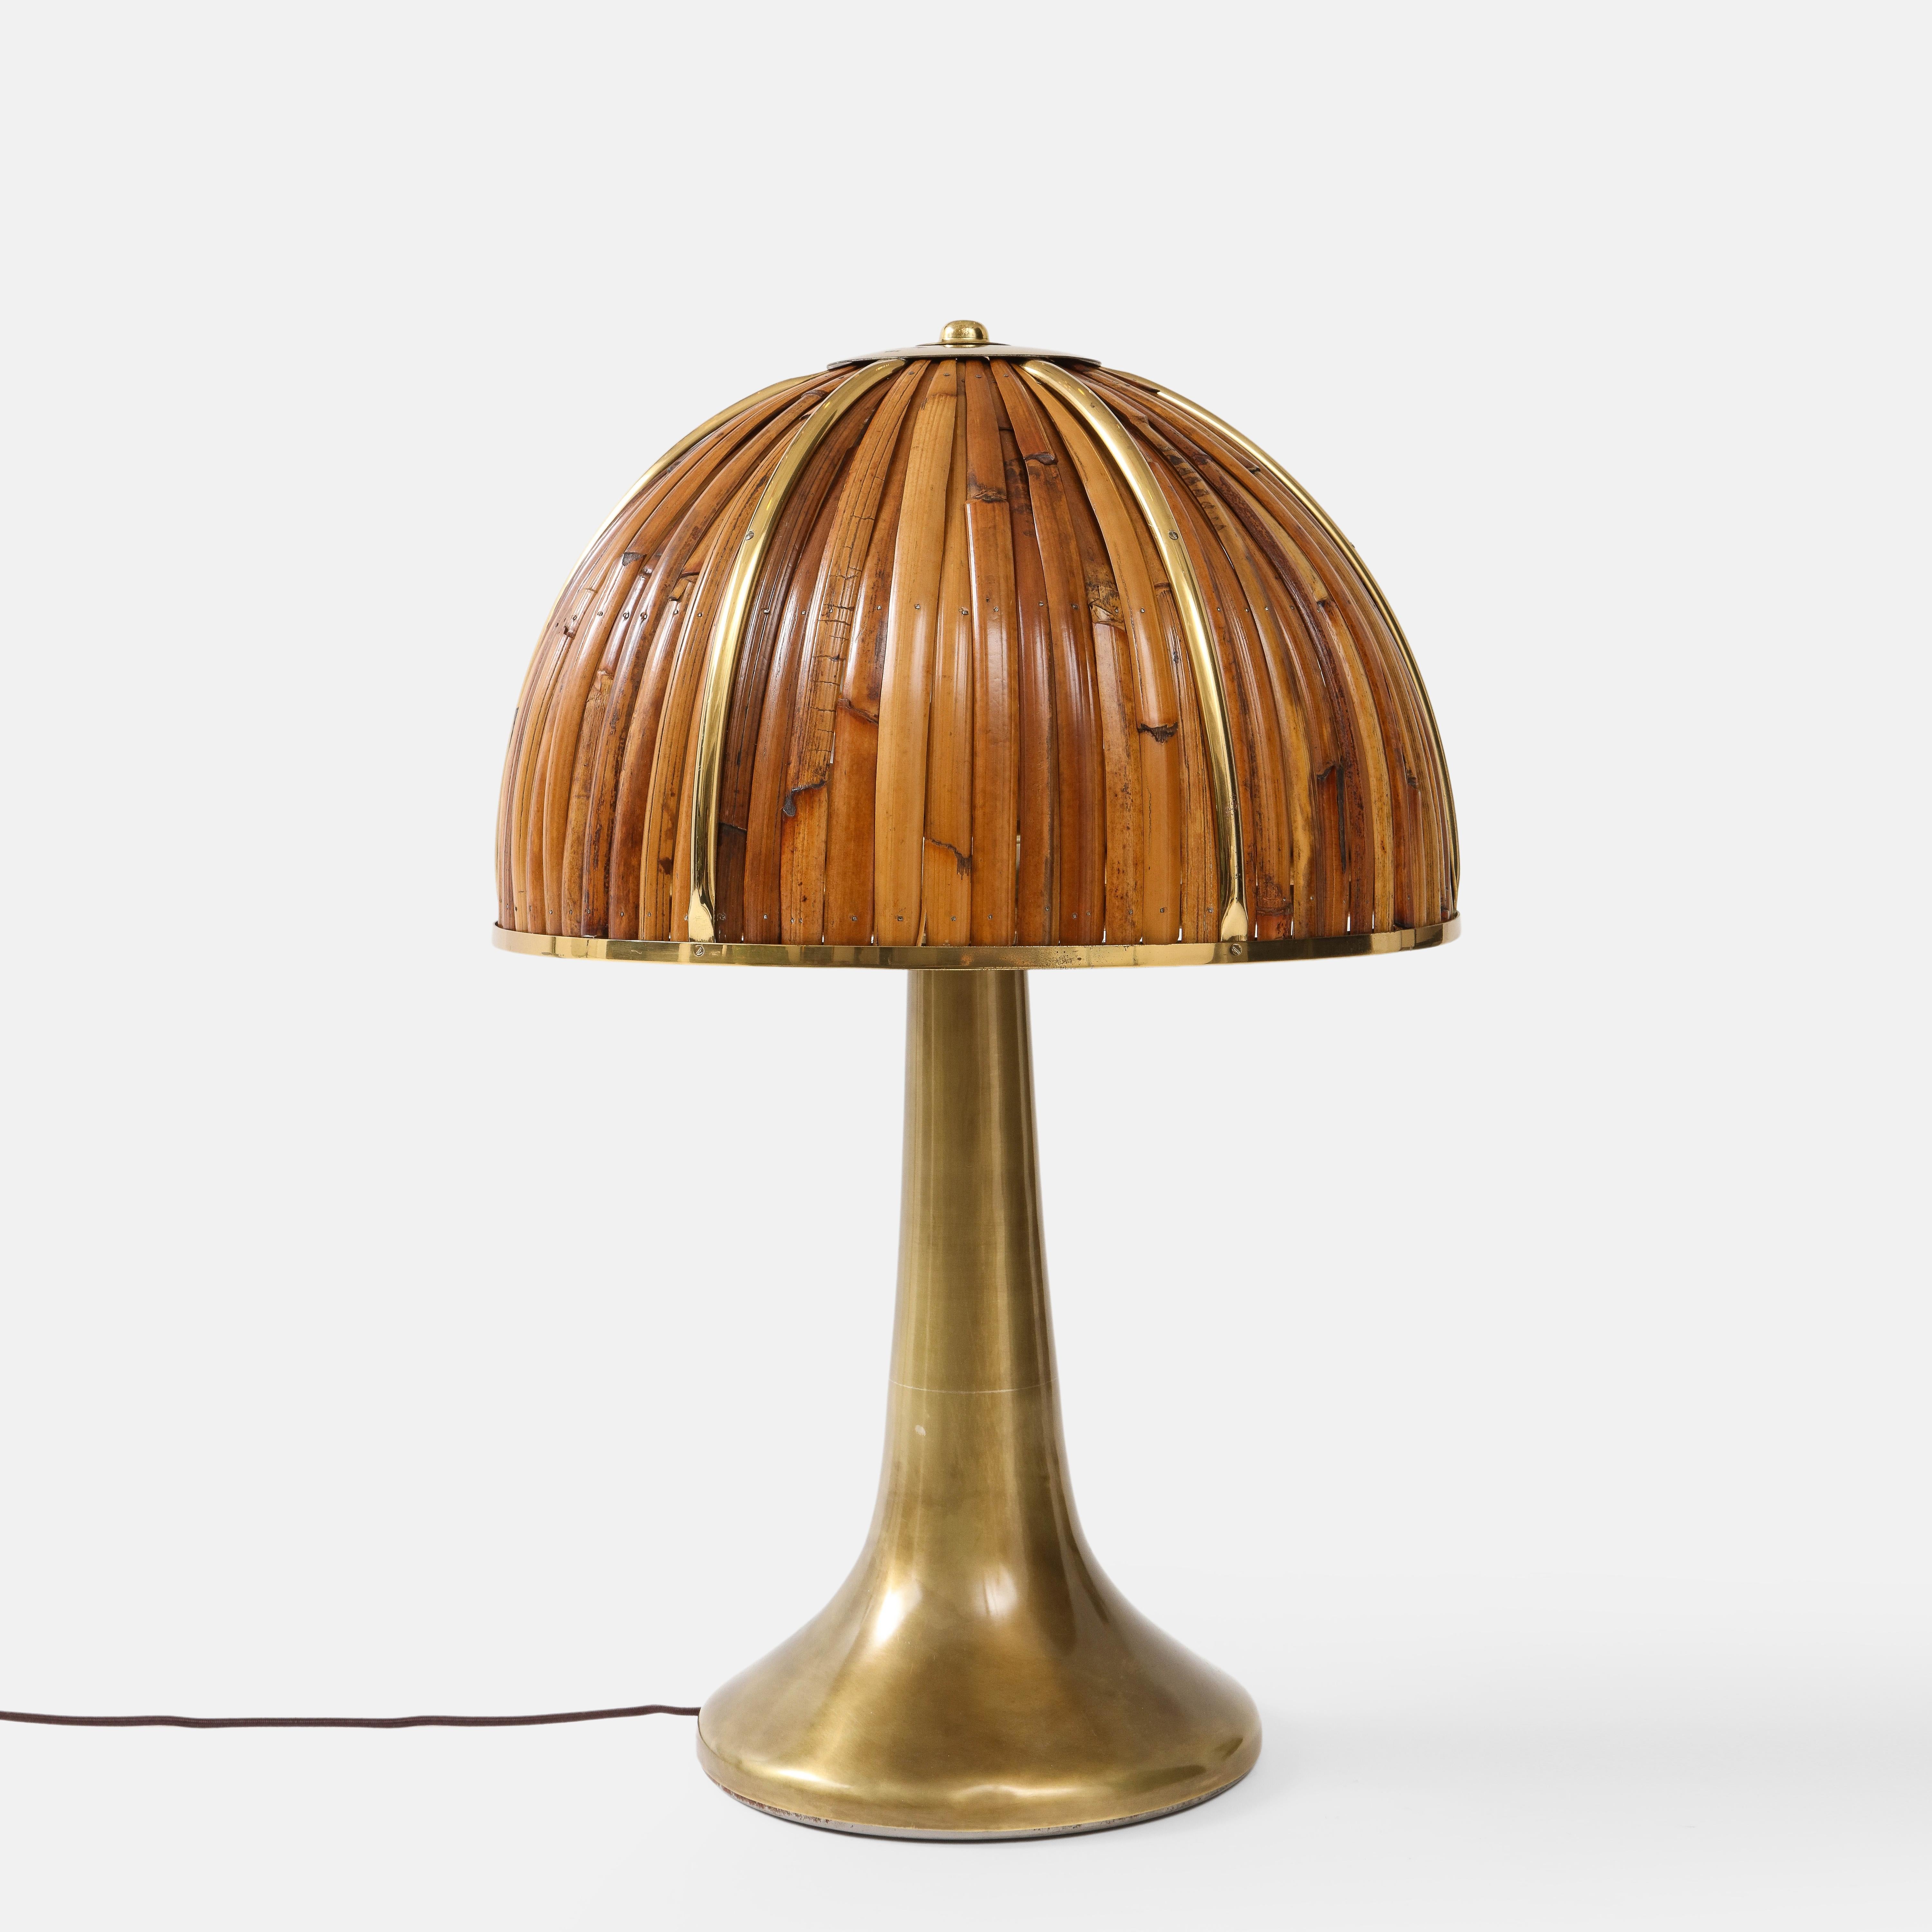 Gabriella Crespi rare 'Fungo' table lamp from the Rising Sun Series with lacquered bamboo strips and polished brass details on dome shade atop elegant flared brass base, Italy, 1970s. Impressed with facsimile signature and artist’s cipher to shade